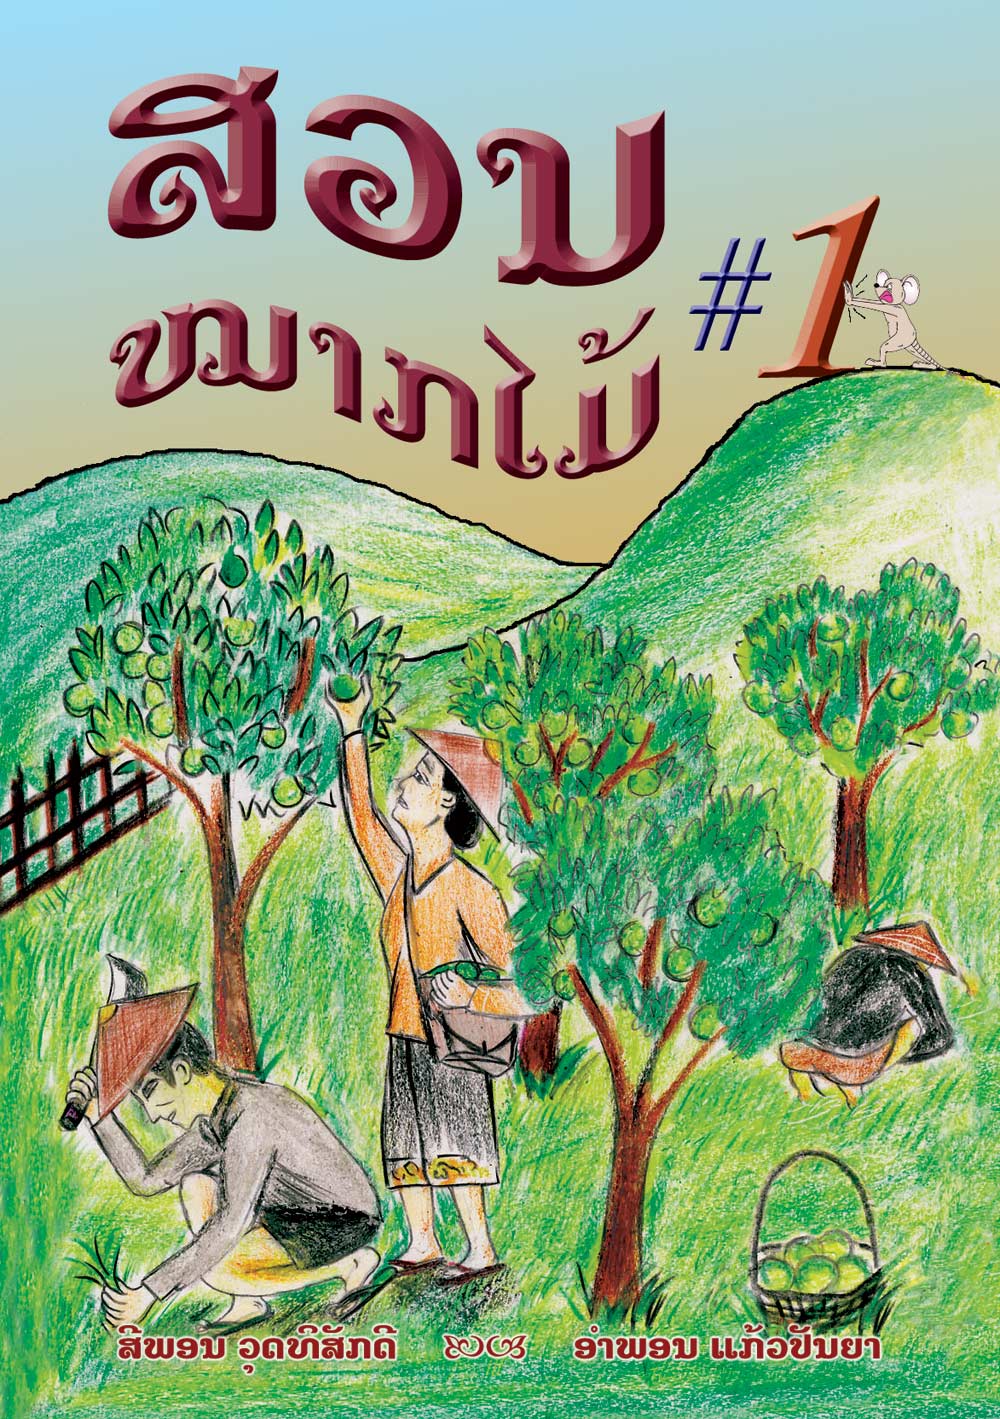 Fruit Farm #1 large book cover, published in Lao language